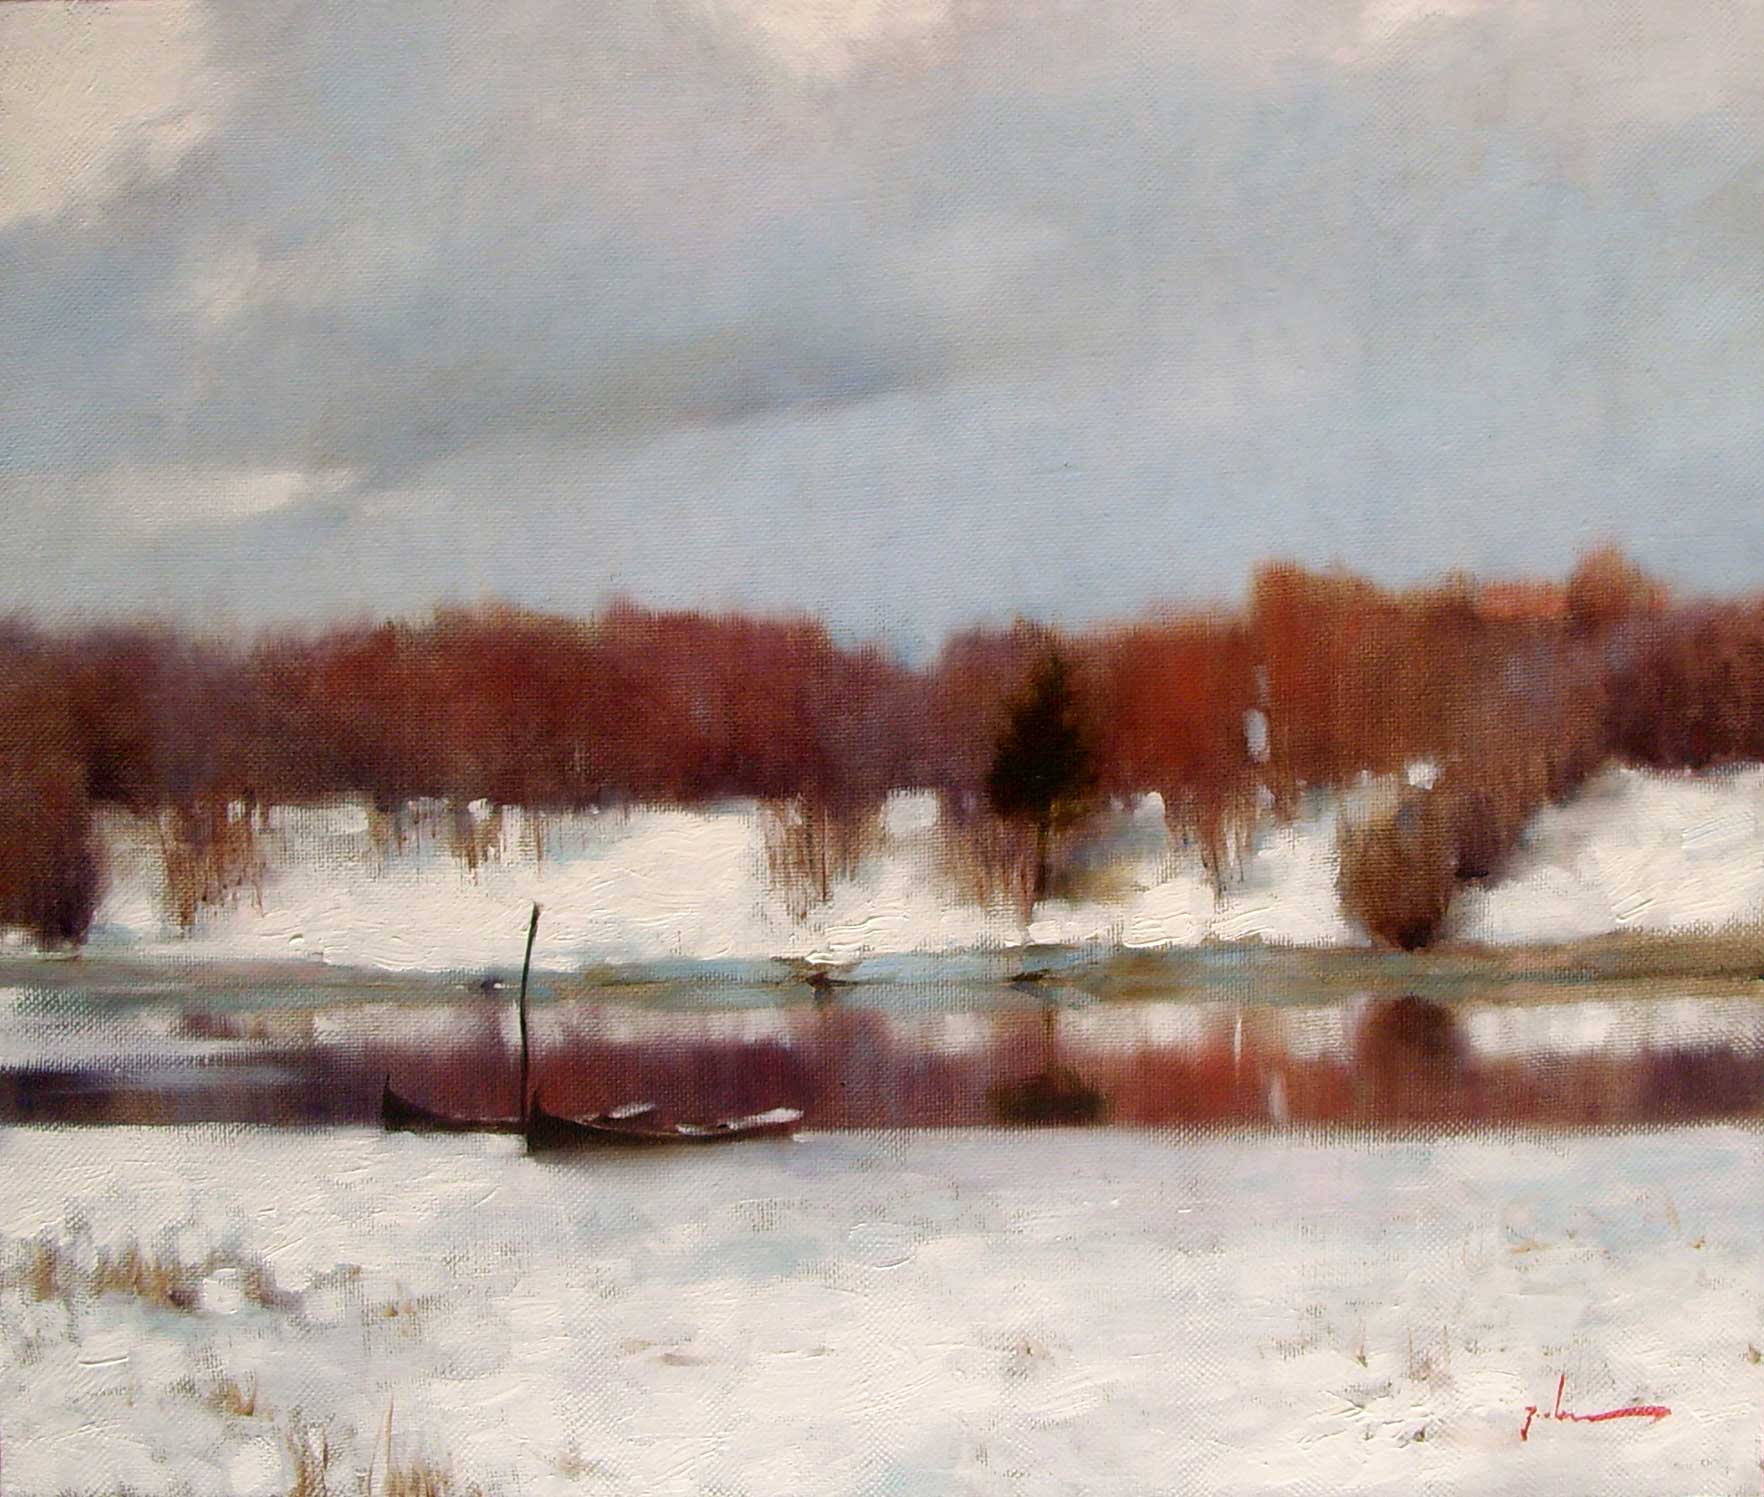 QUIET TIME, OIL ON CANVAS, 39X53, 2008